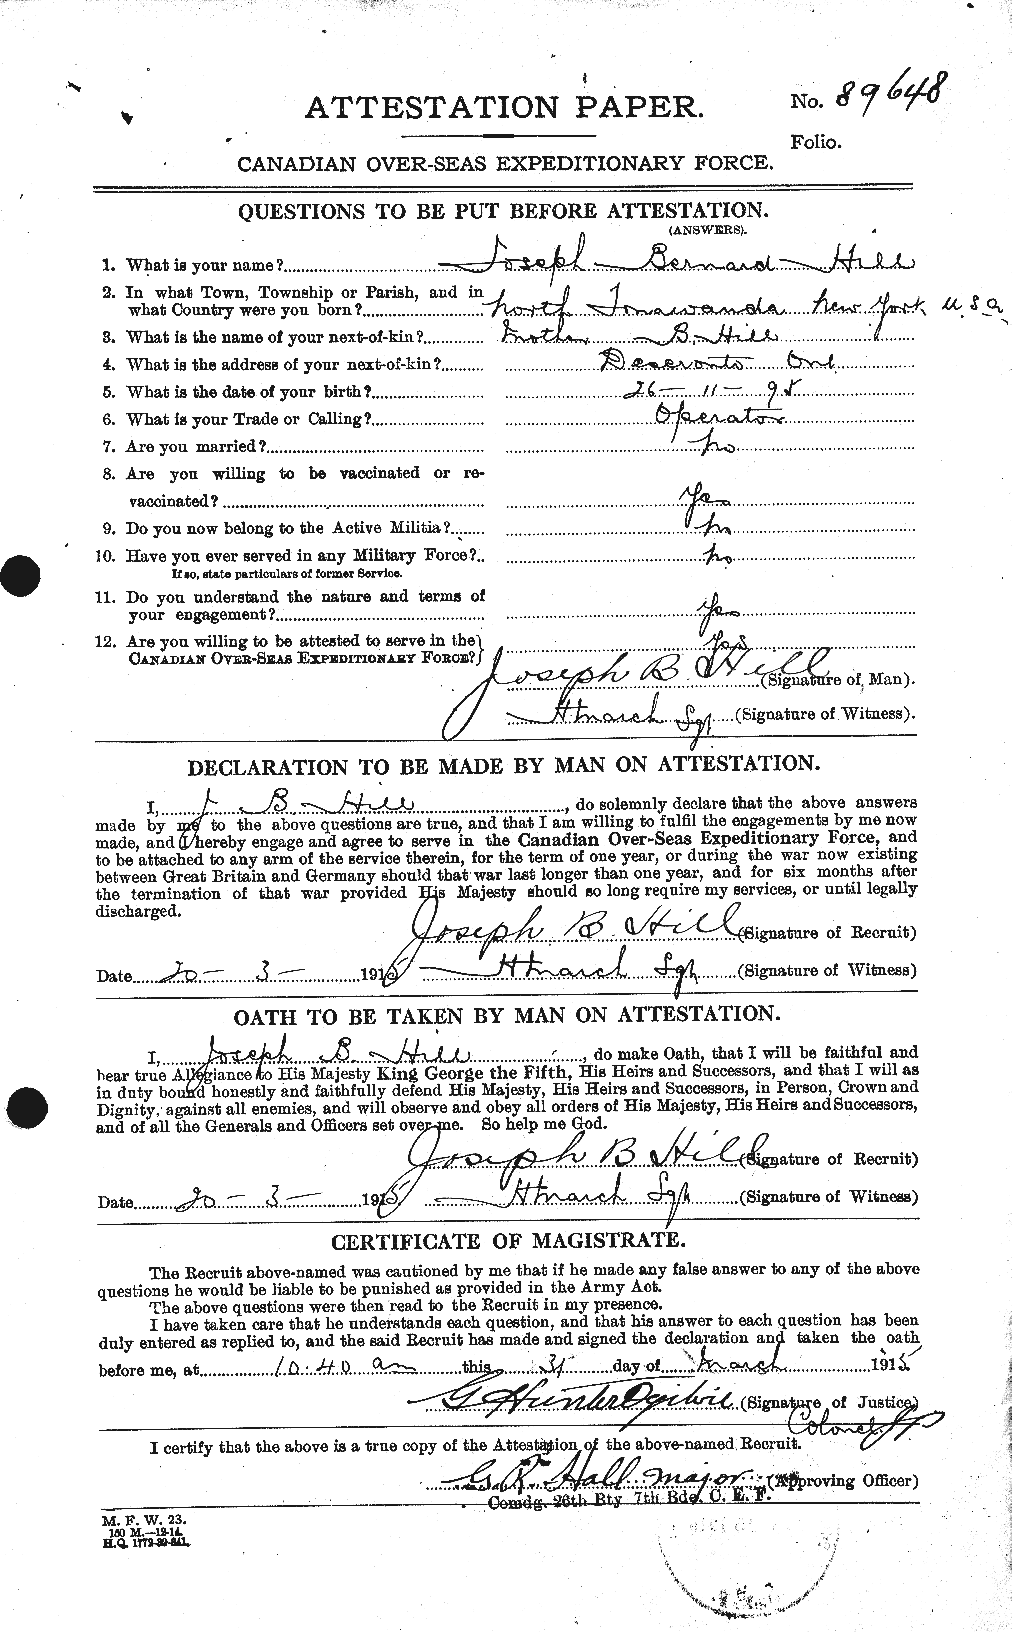 Personnel Records of the First World War - CEF 404229a